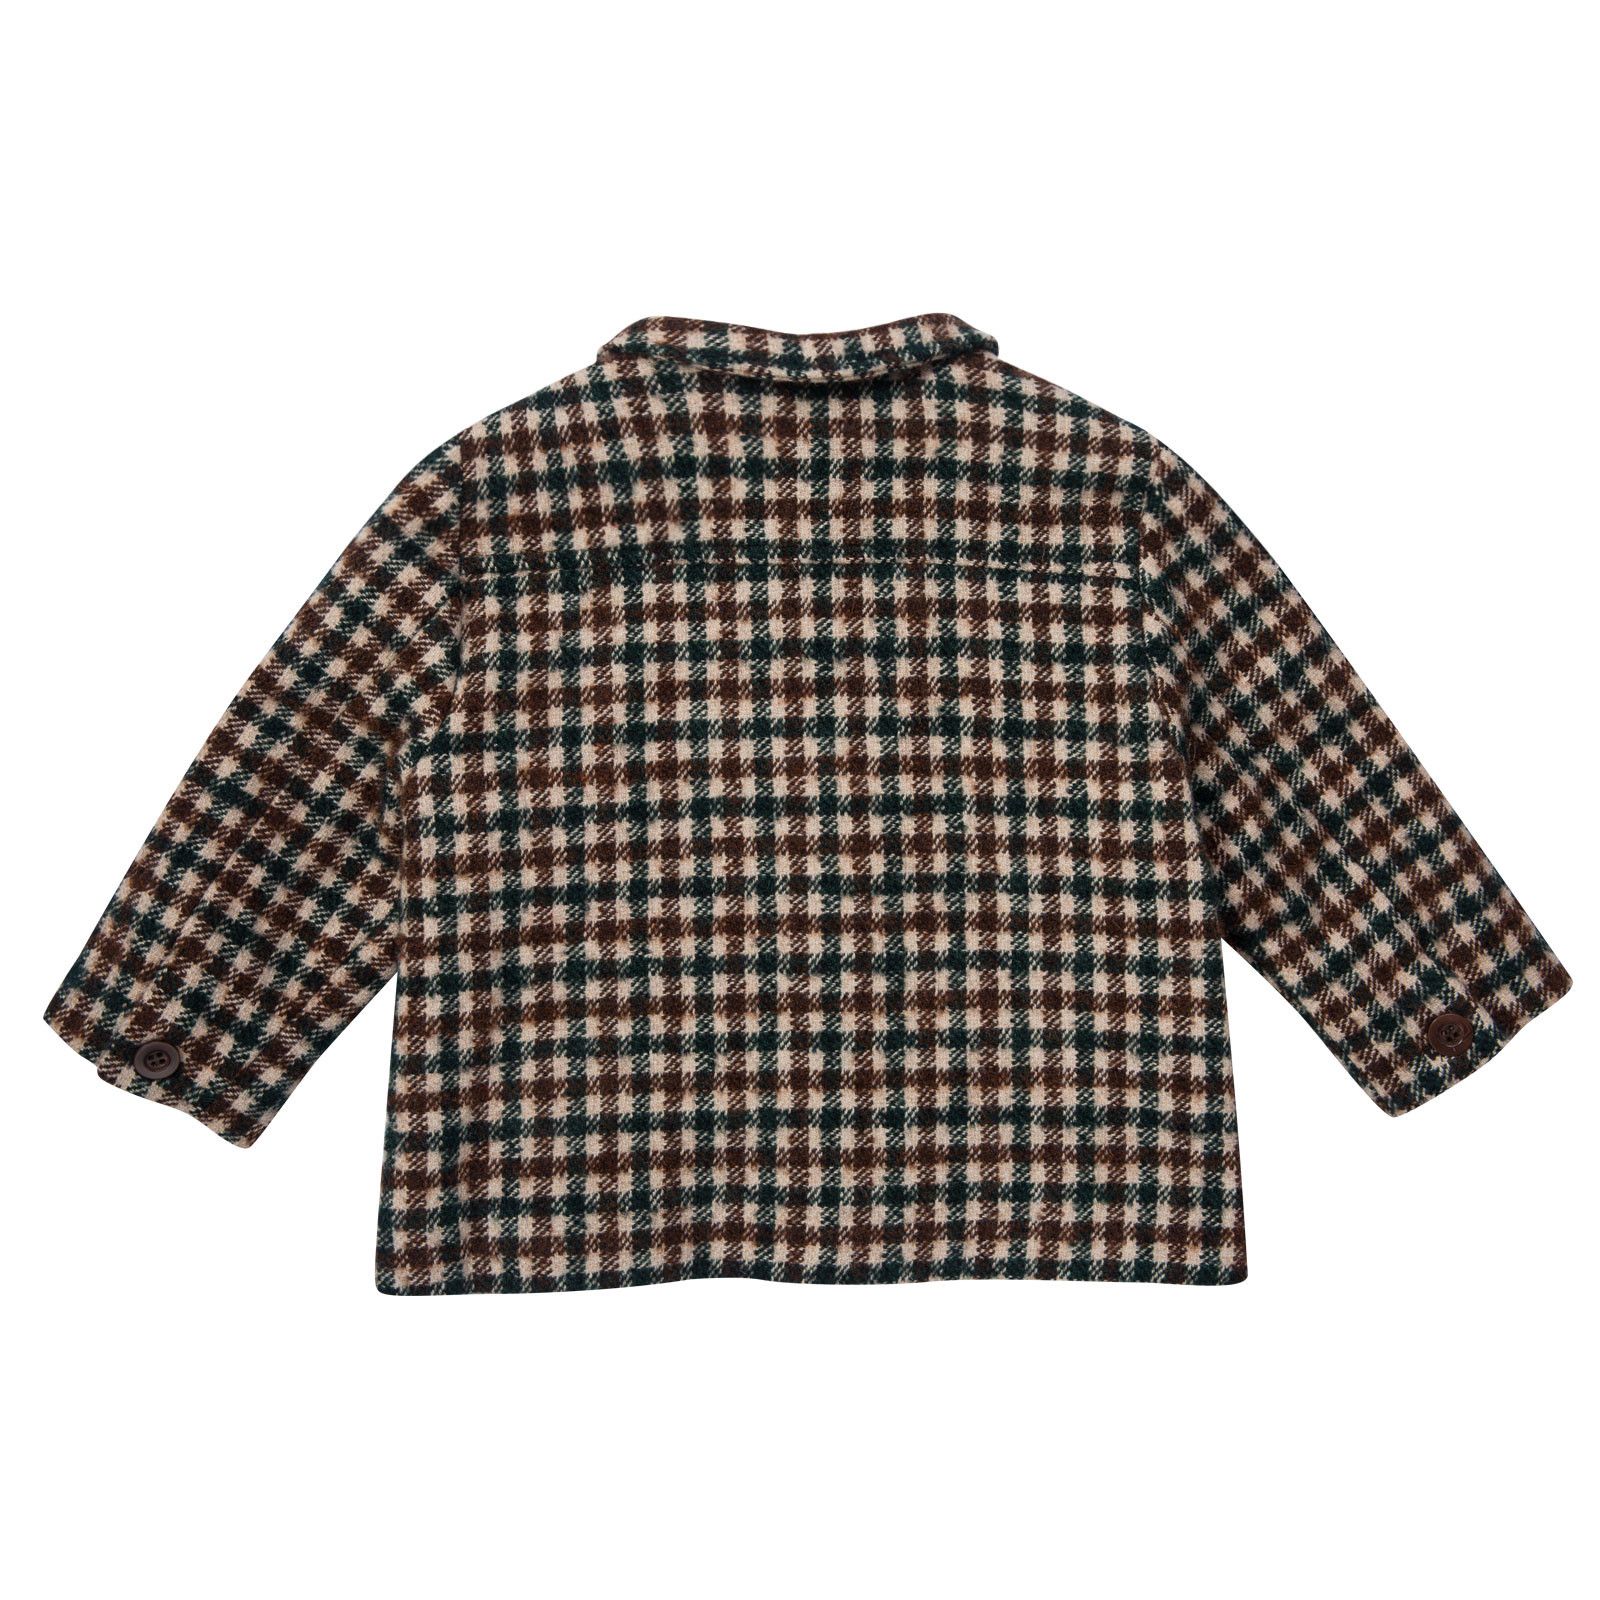 Baby Brown&Green Check Wool Coat With Flap Pockets - CÉMAROSE | Children's Fashion Store - 2